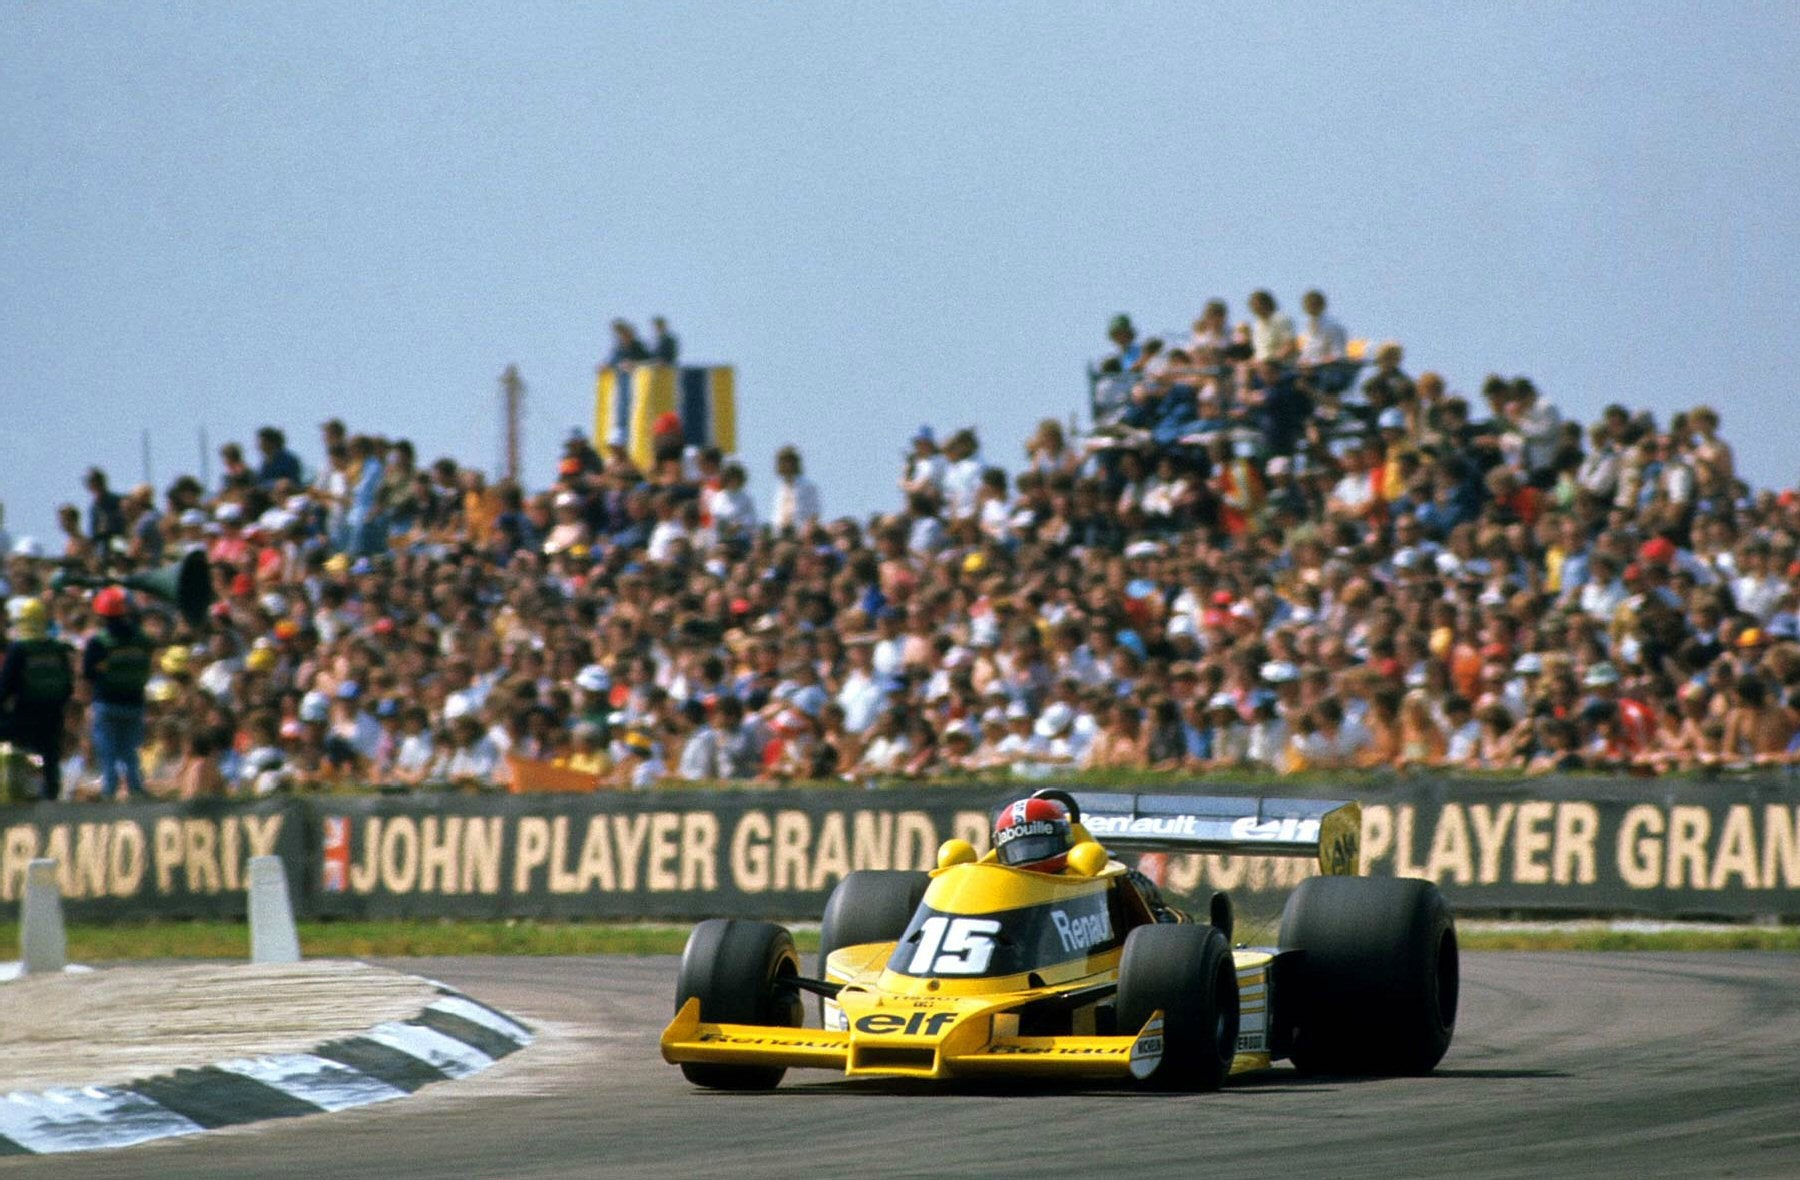 Jean Pierre Jabouille, Renault Turbo, at Silverstone on 16 July 1977.